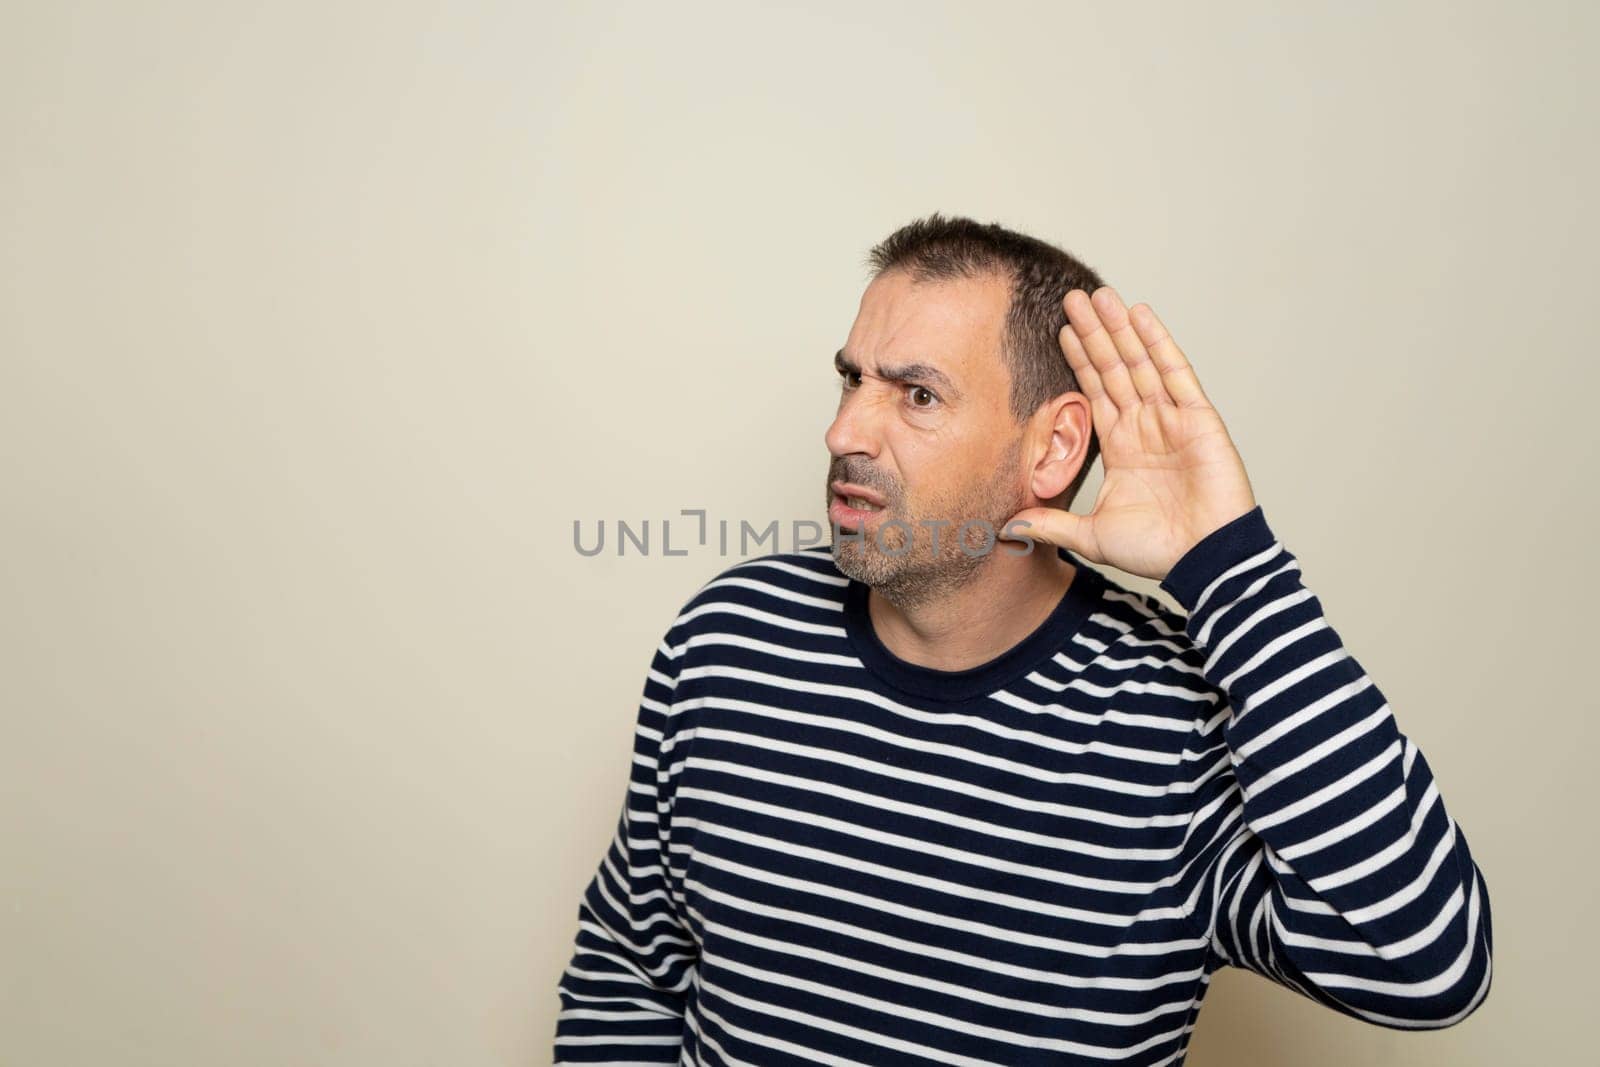 Hispanic man with beard in his 40s wearing a striped sweater listening to rumors keeping hand near ear isolated over beige color background. by Barriolo82